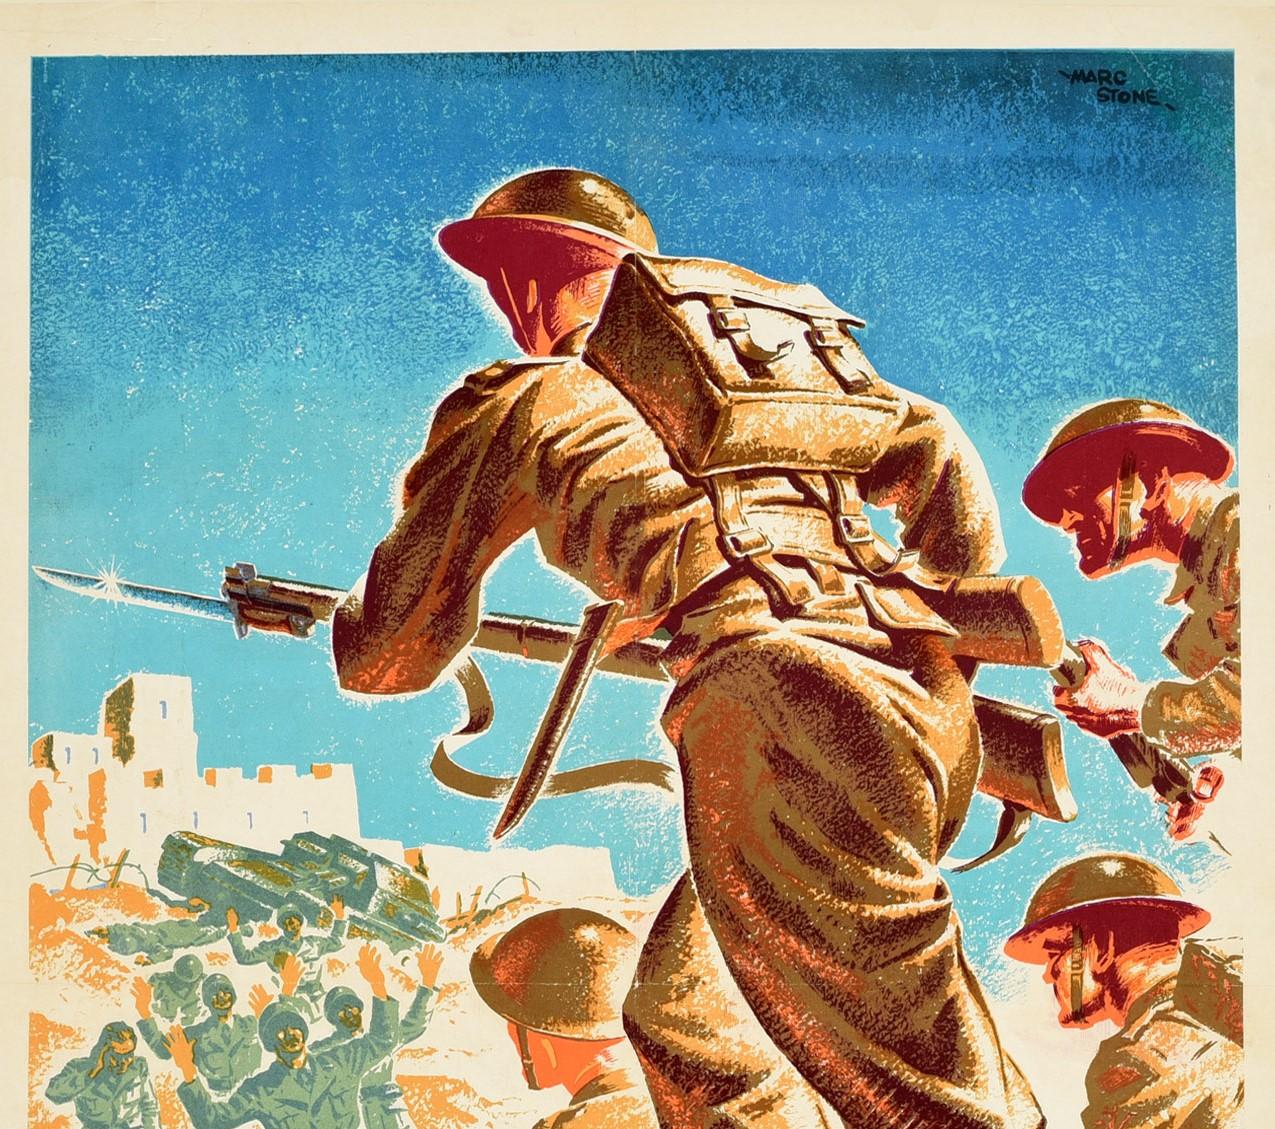 Original vintage World War Two propaganda poster - Libya Help Them Finish The Job - featuring a dynamic image by the British artist Marcus Stone (1909-1991) showing British soldiers armed with bayonet rifle guns charging forward on a battlefield